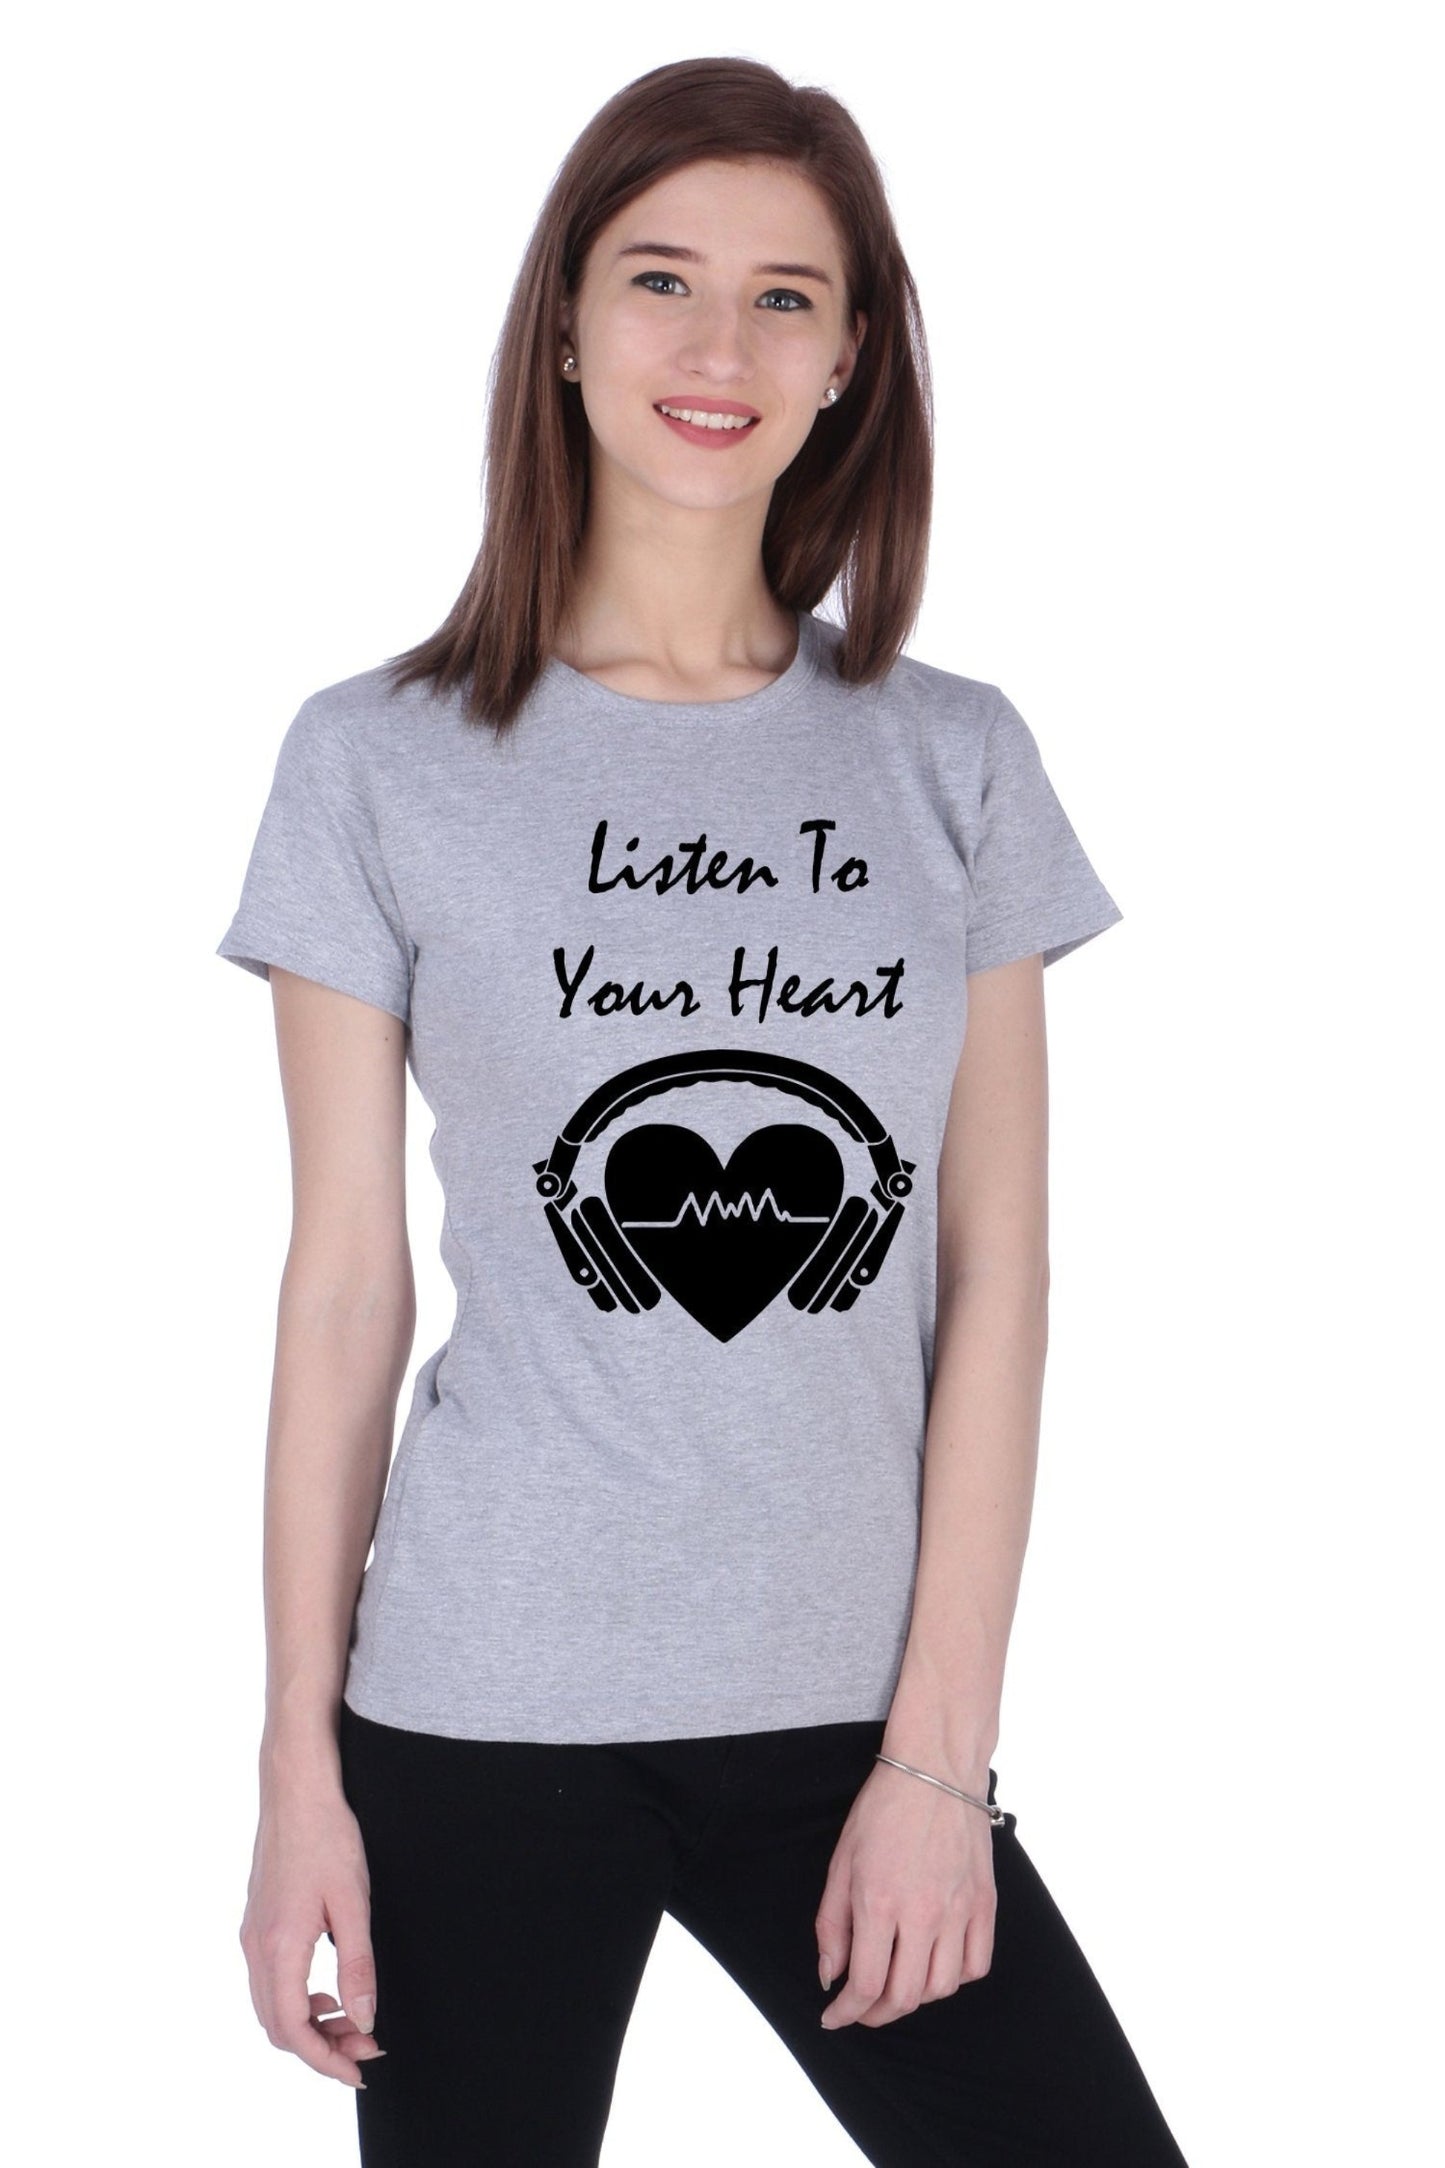 Women's Cotton Round Neck T-shirt - LISTEN TO YOUR HEART , front view